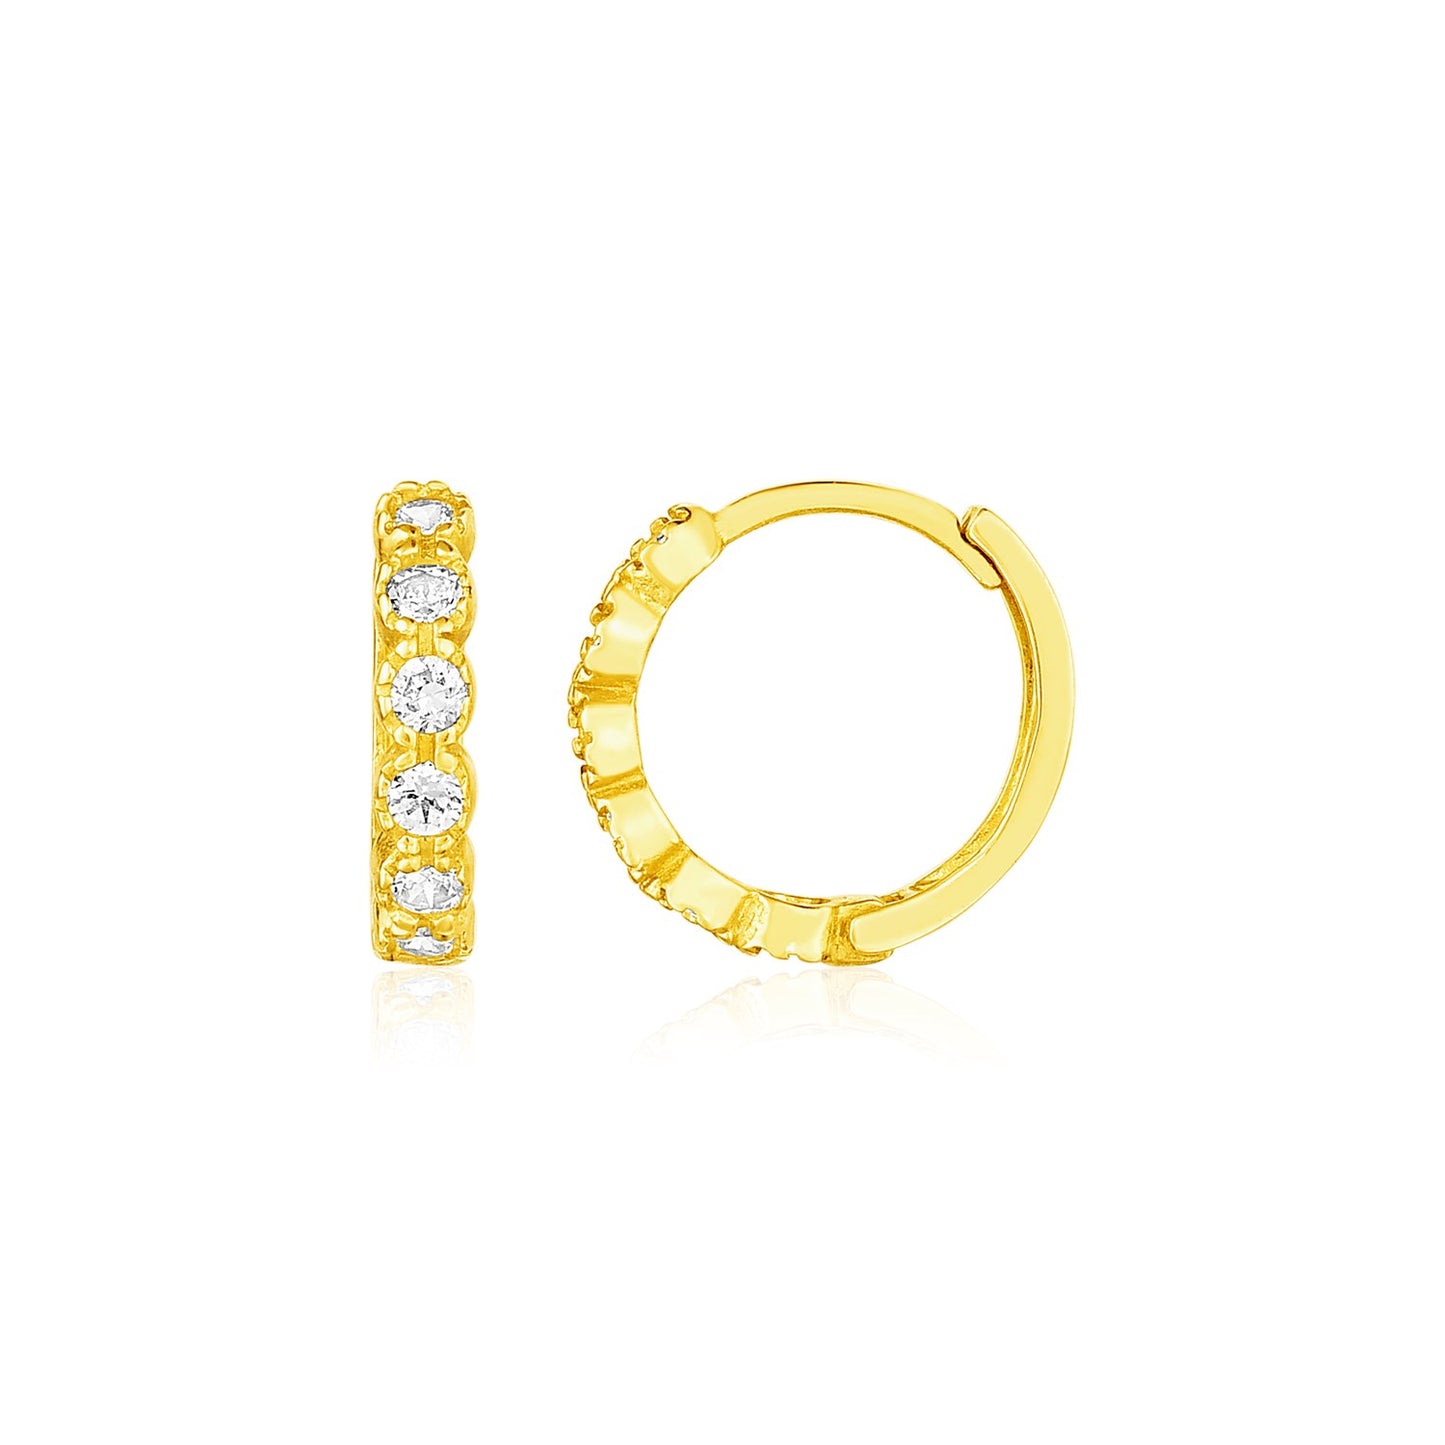 14k Yellow Gold Petite Hoop Earrings with Round Cubic Zirconias